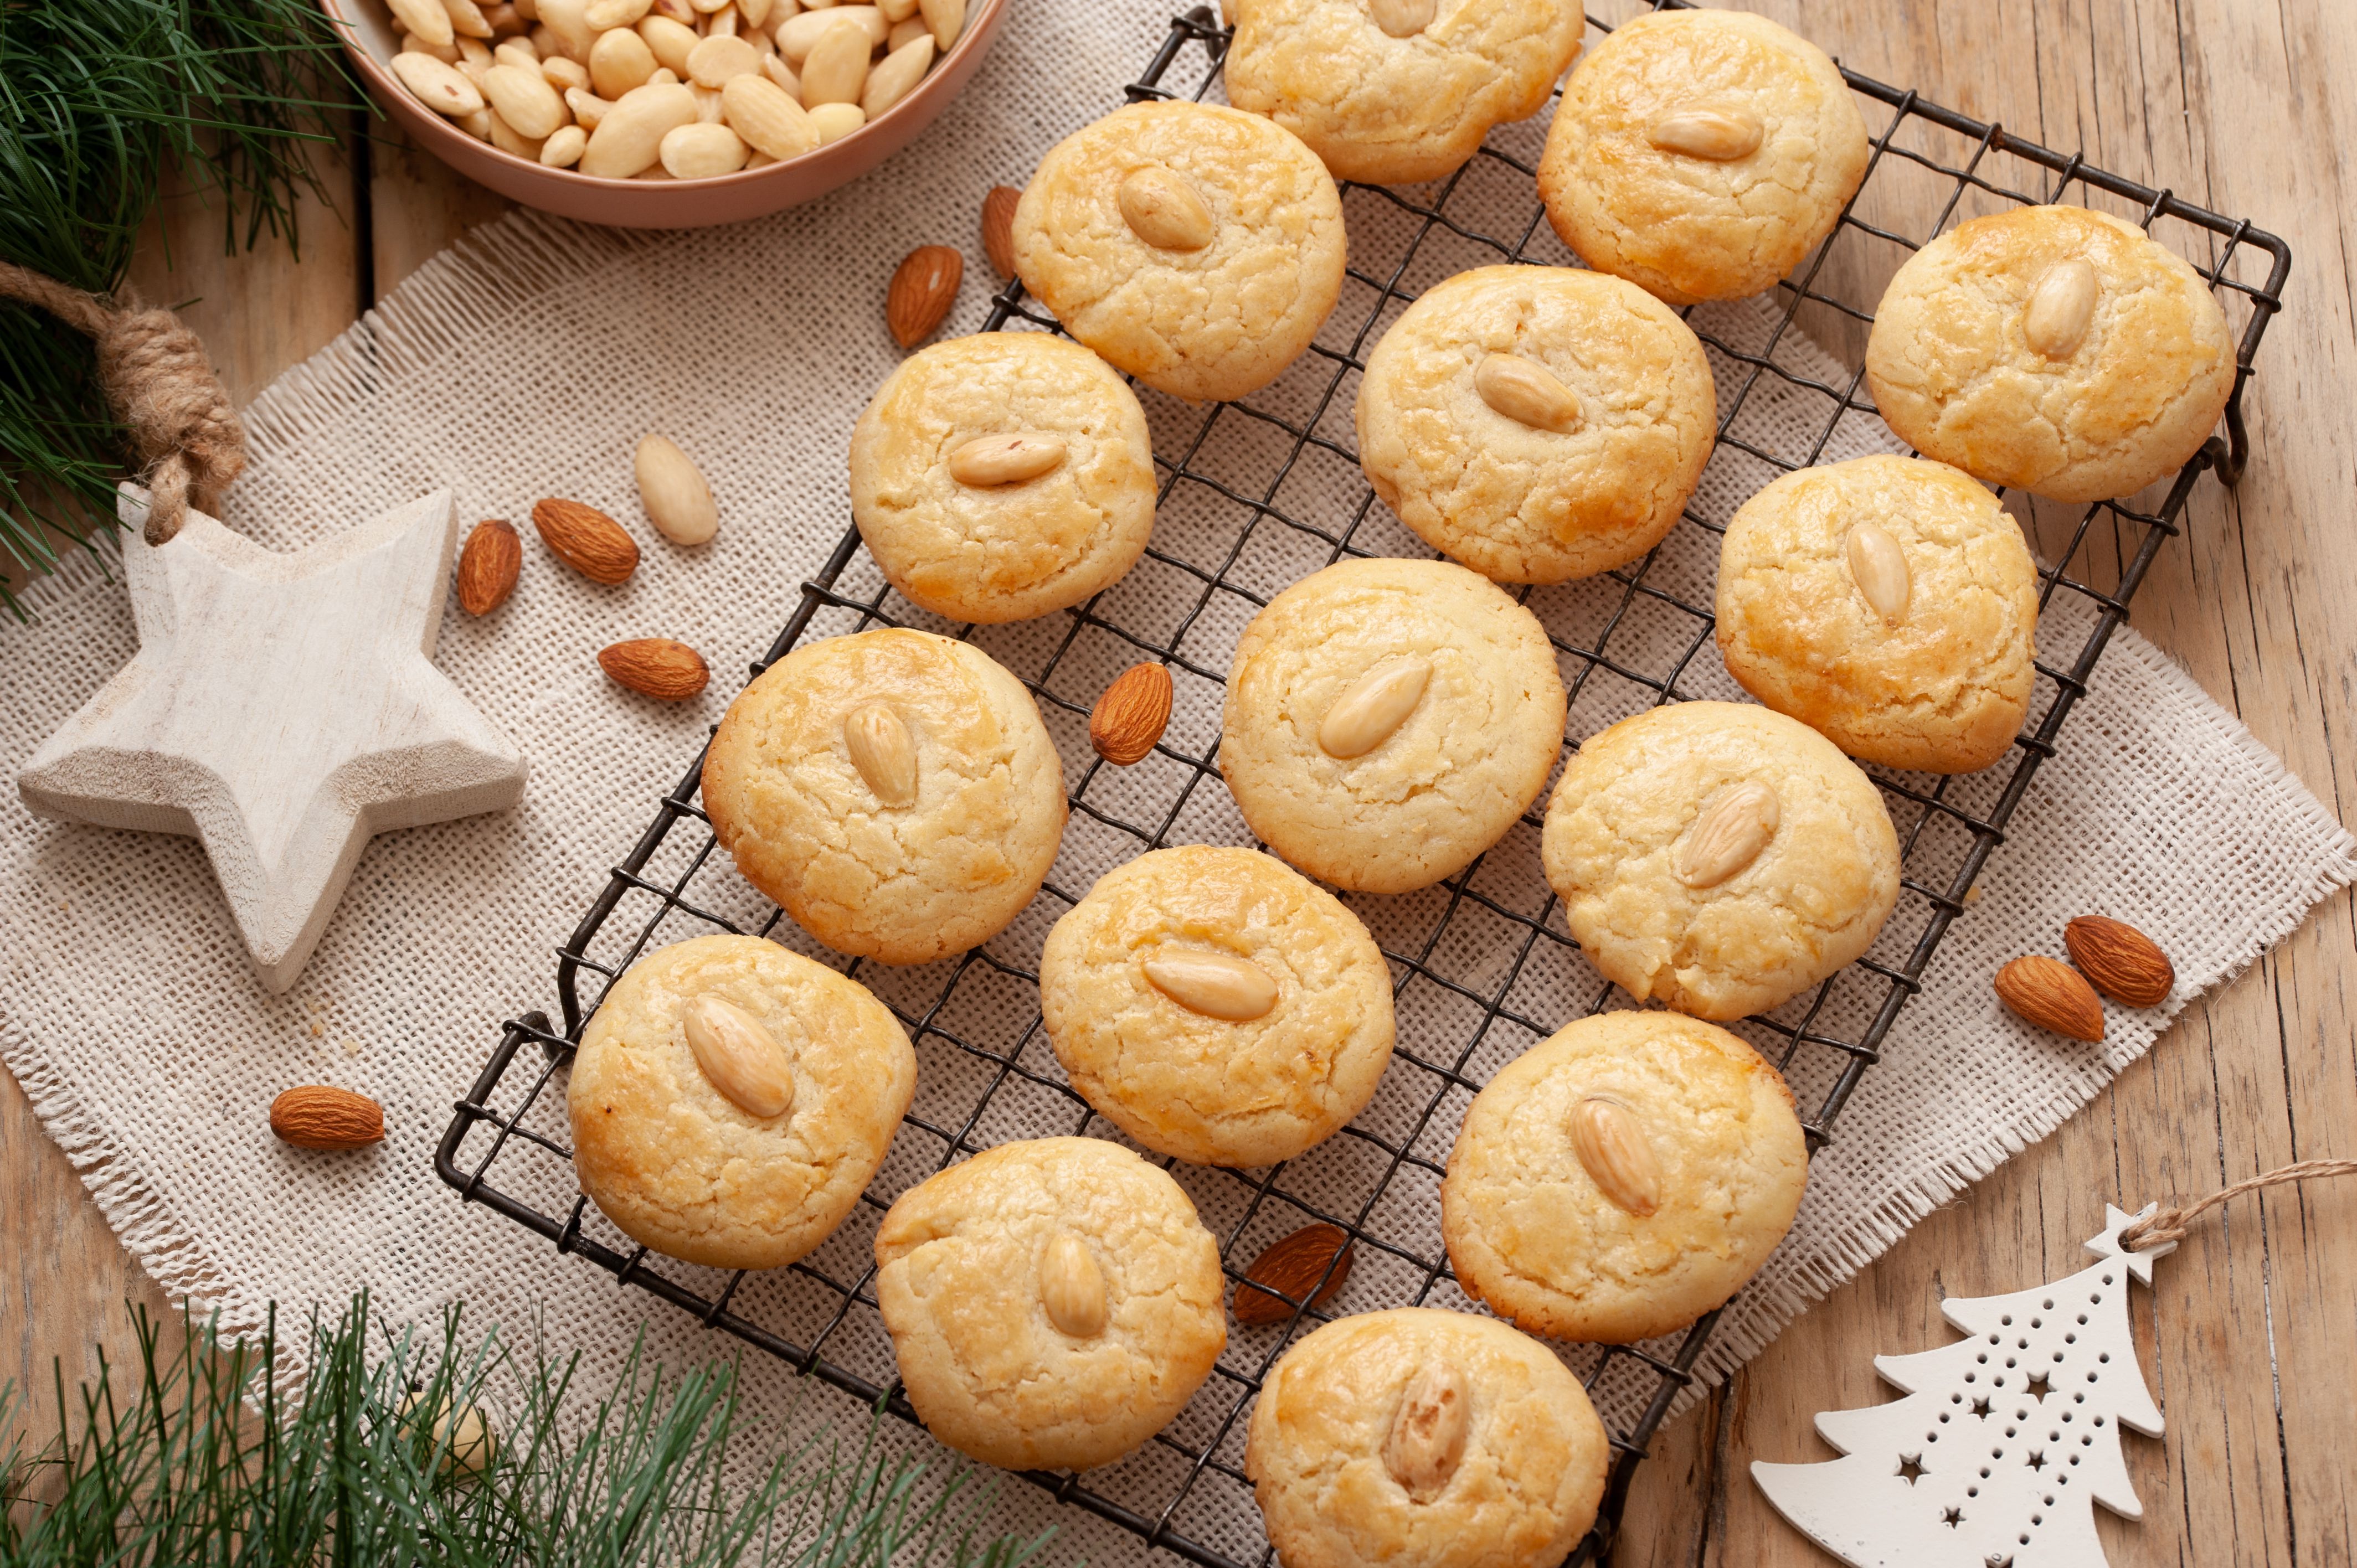 Nutty and Delicious Chinese Almond Cookies